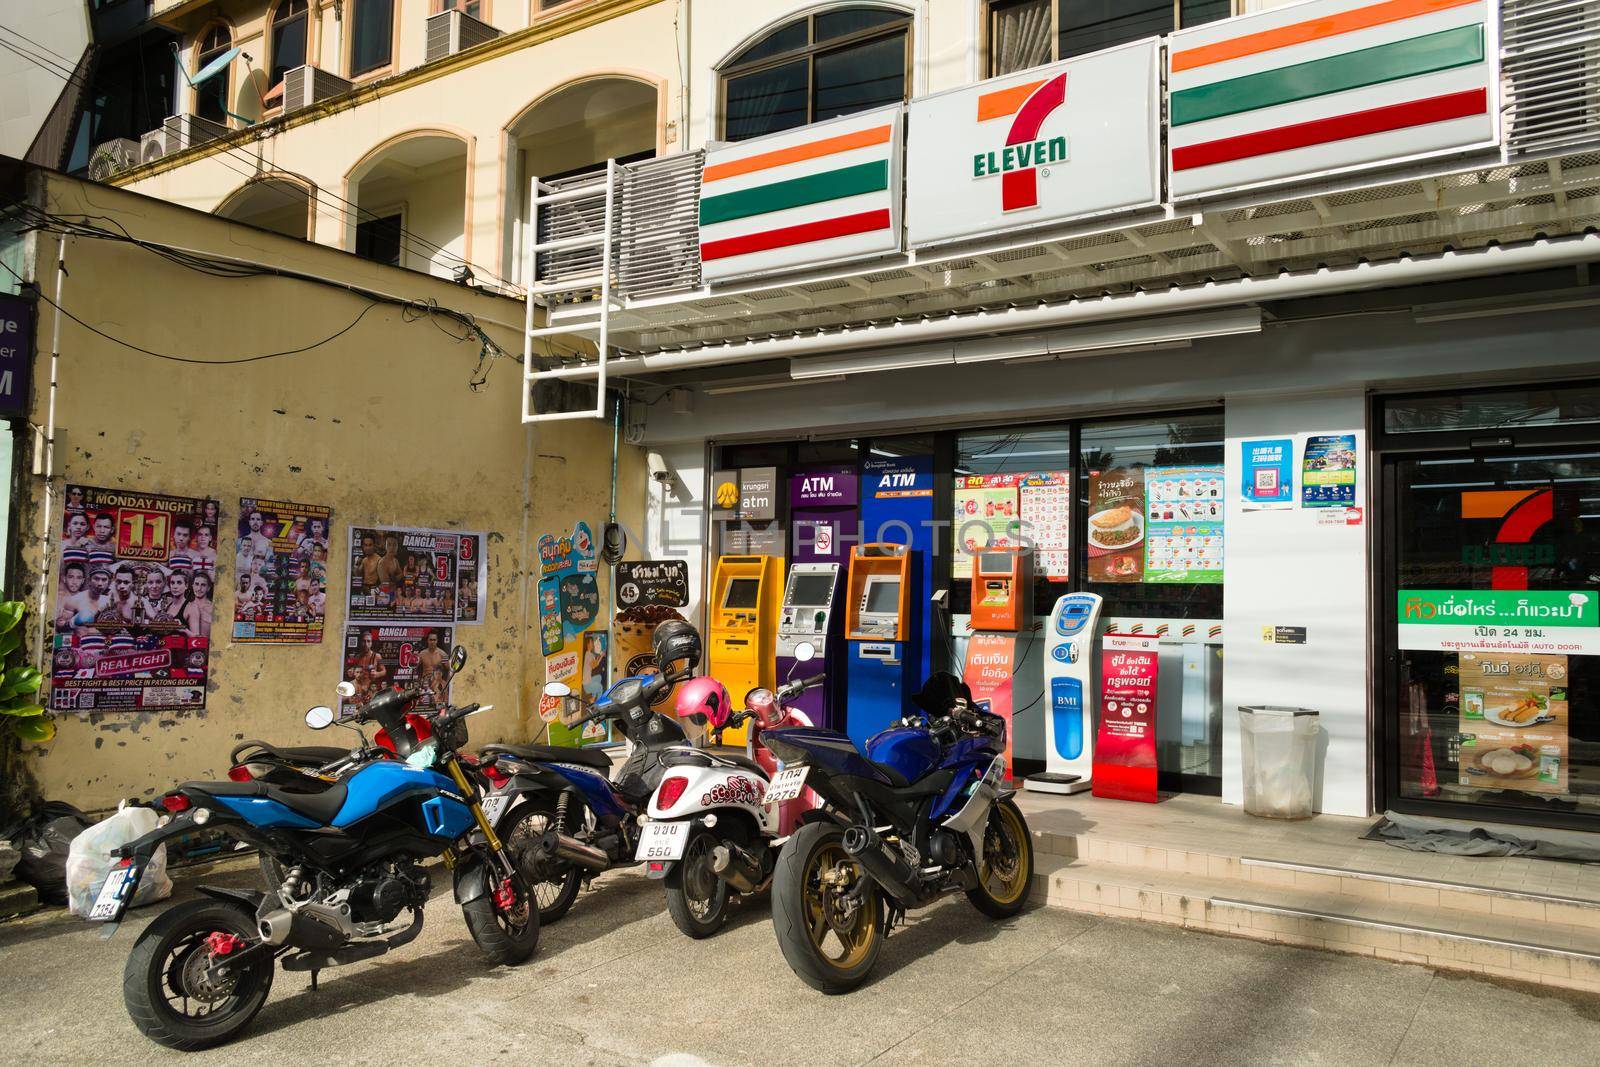 2019-11-05 / Phuket, Thailand - Parked motorcyles outside of a 7-Eleven store. by hernan_hyper